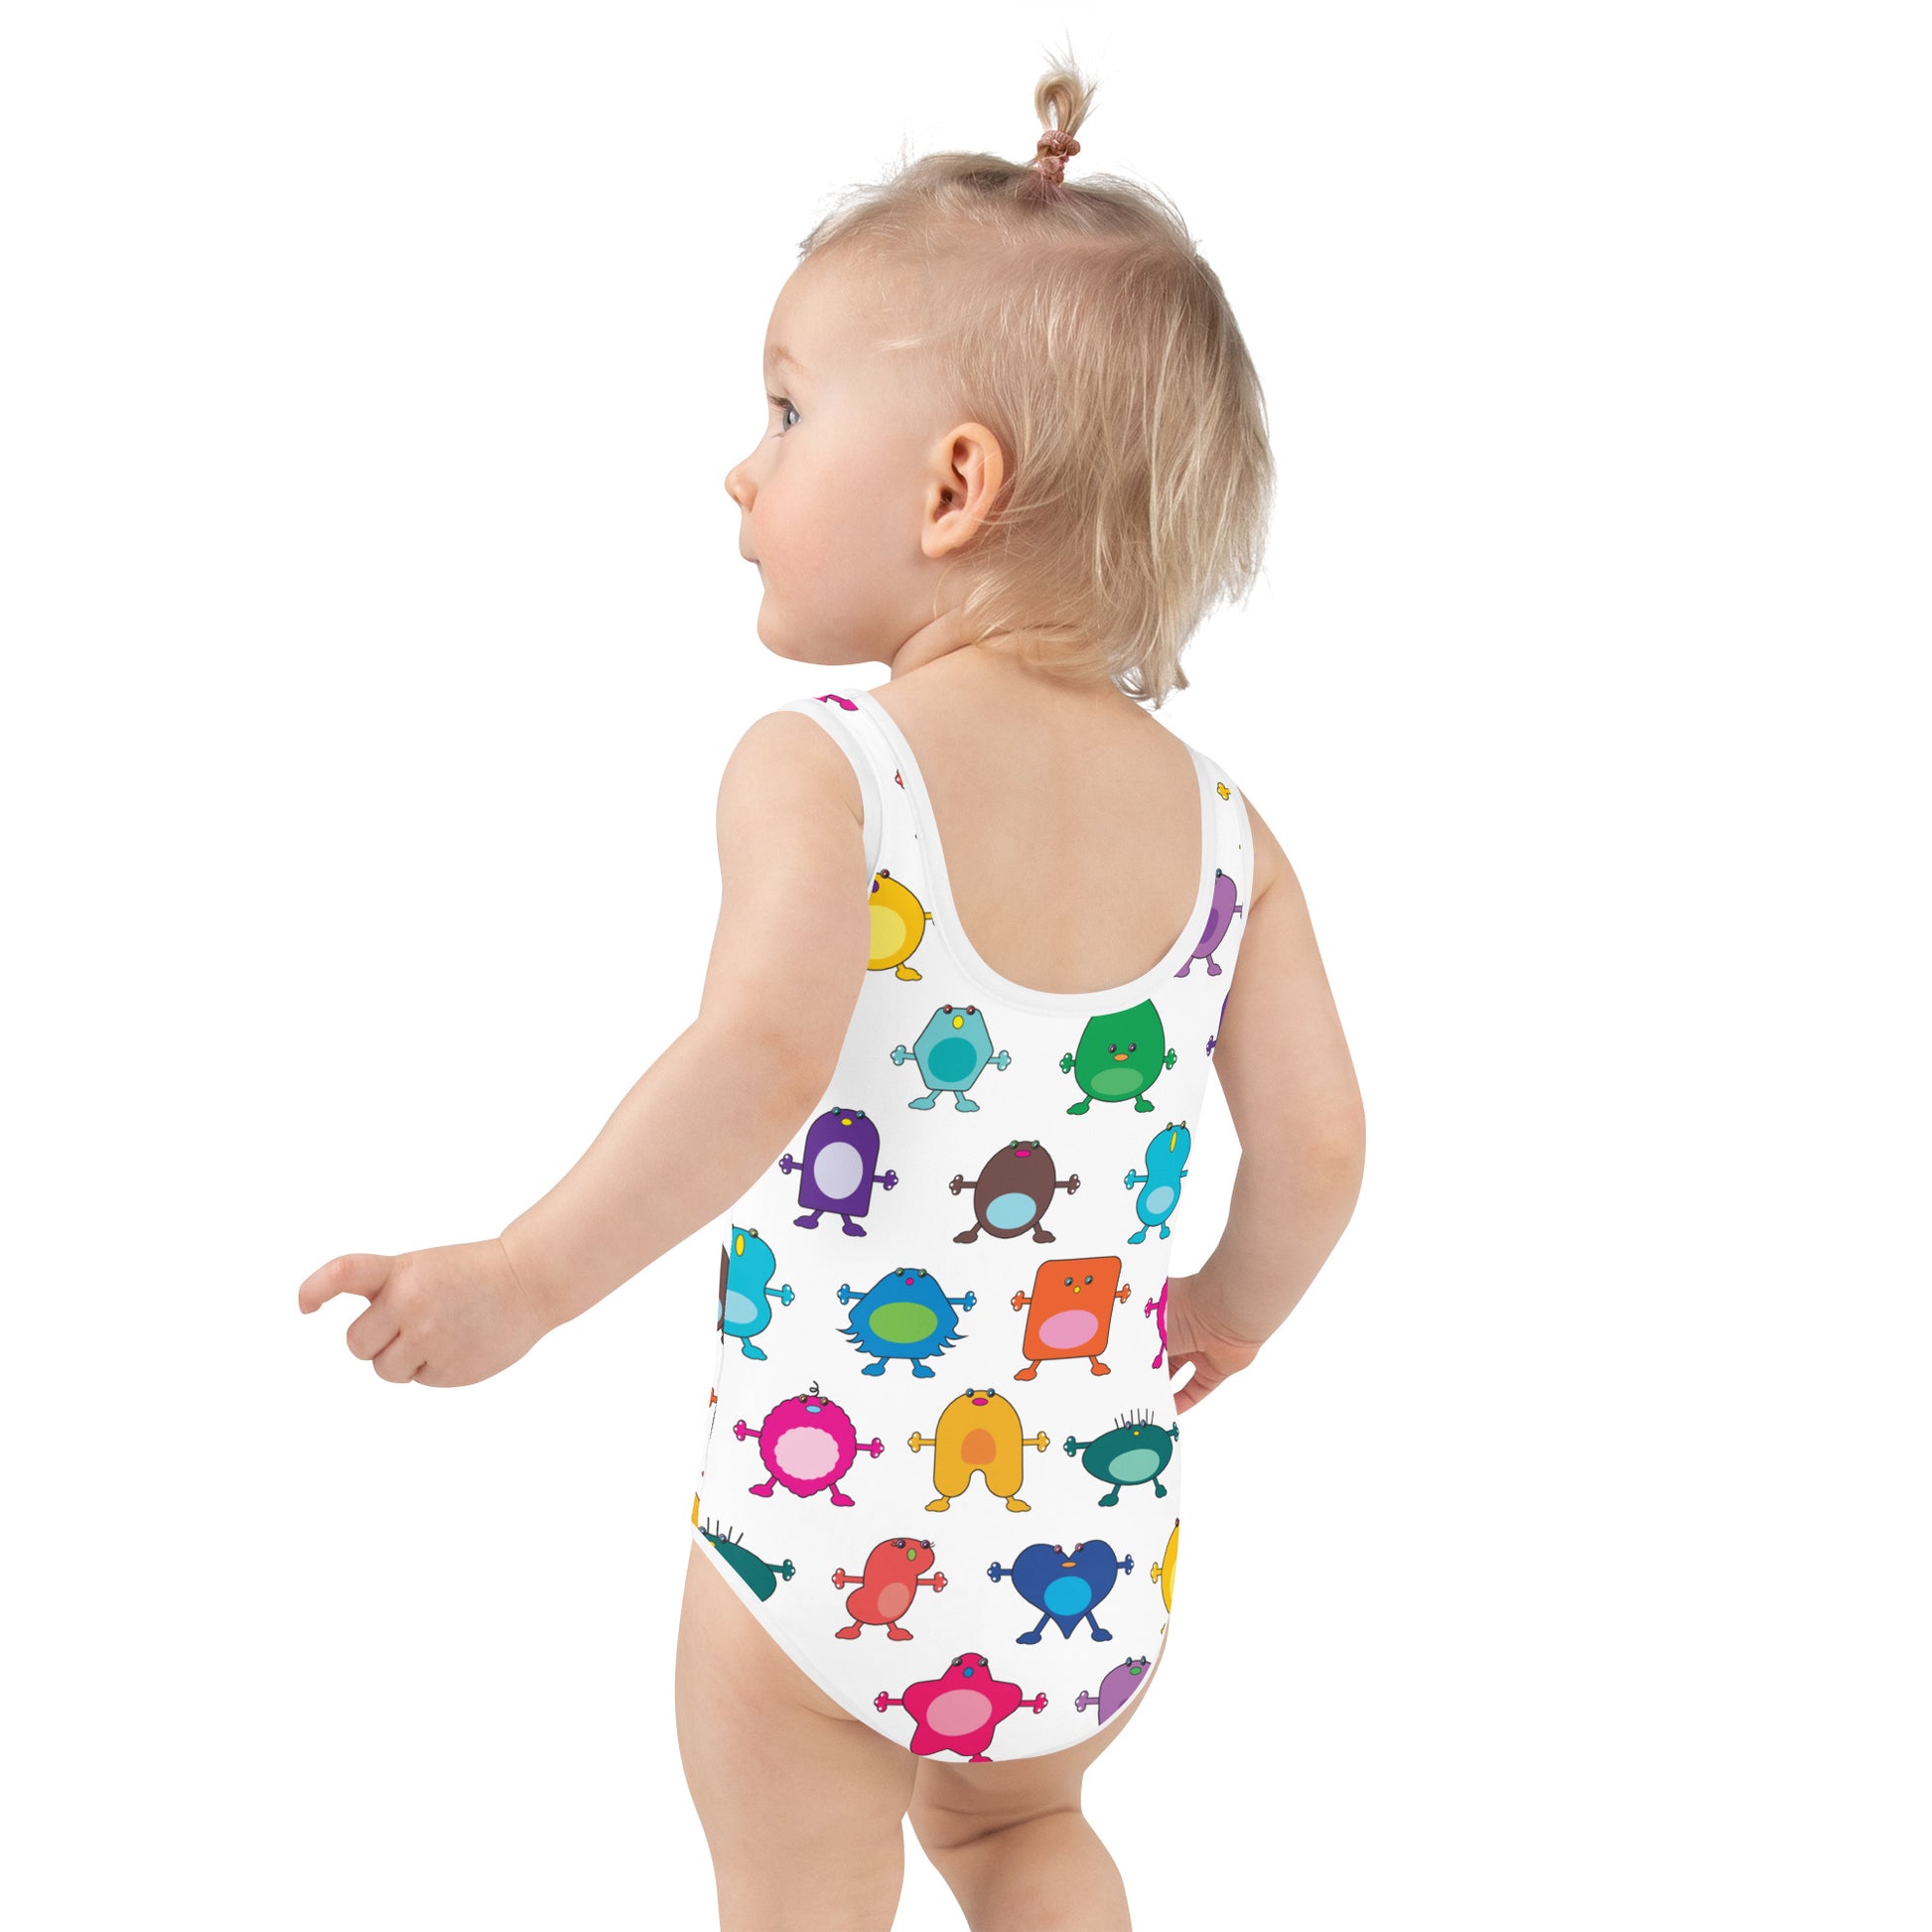 white girls swim suit with large coloured monsters toddler rear view